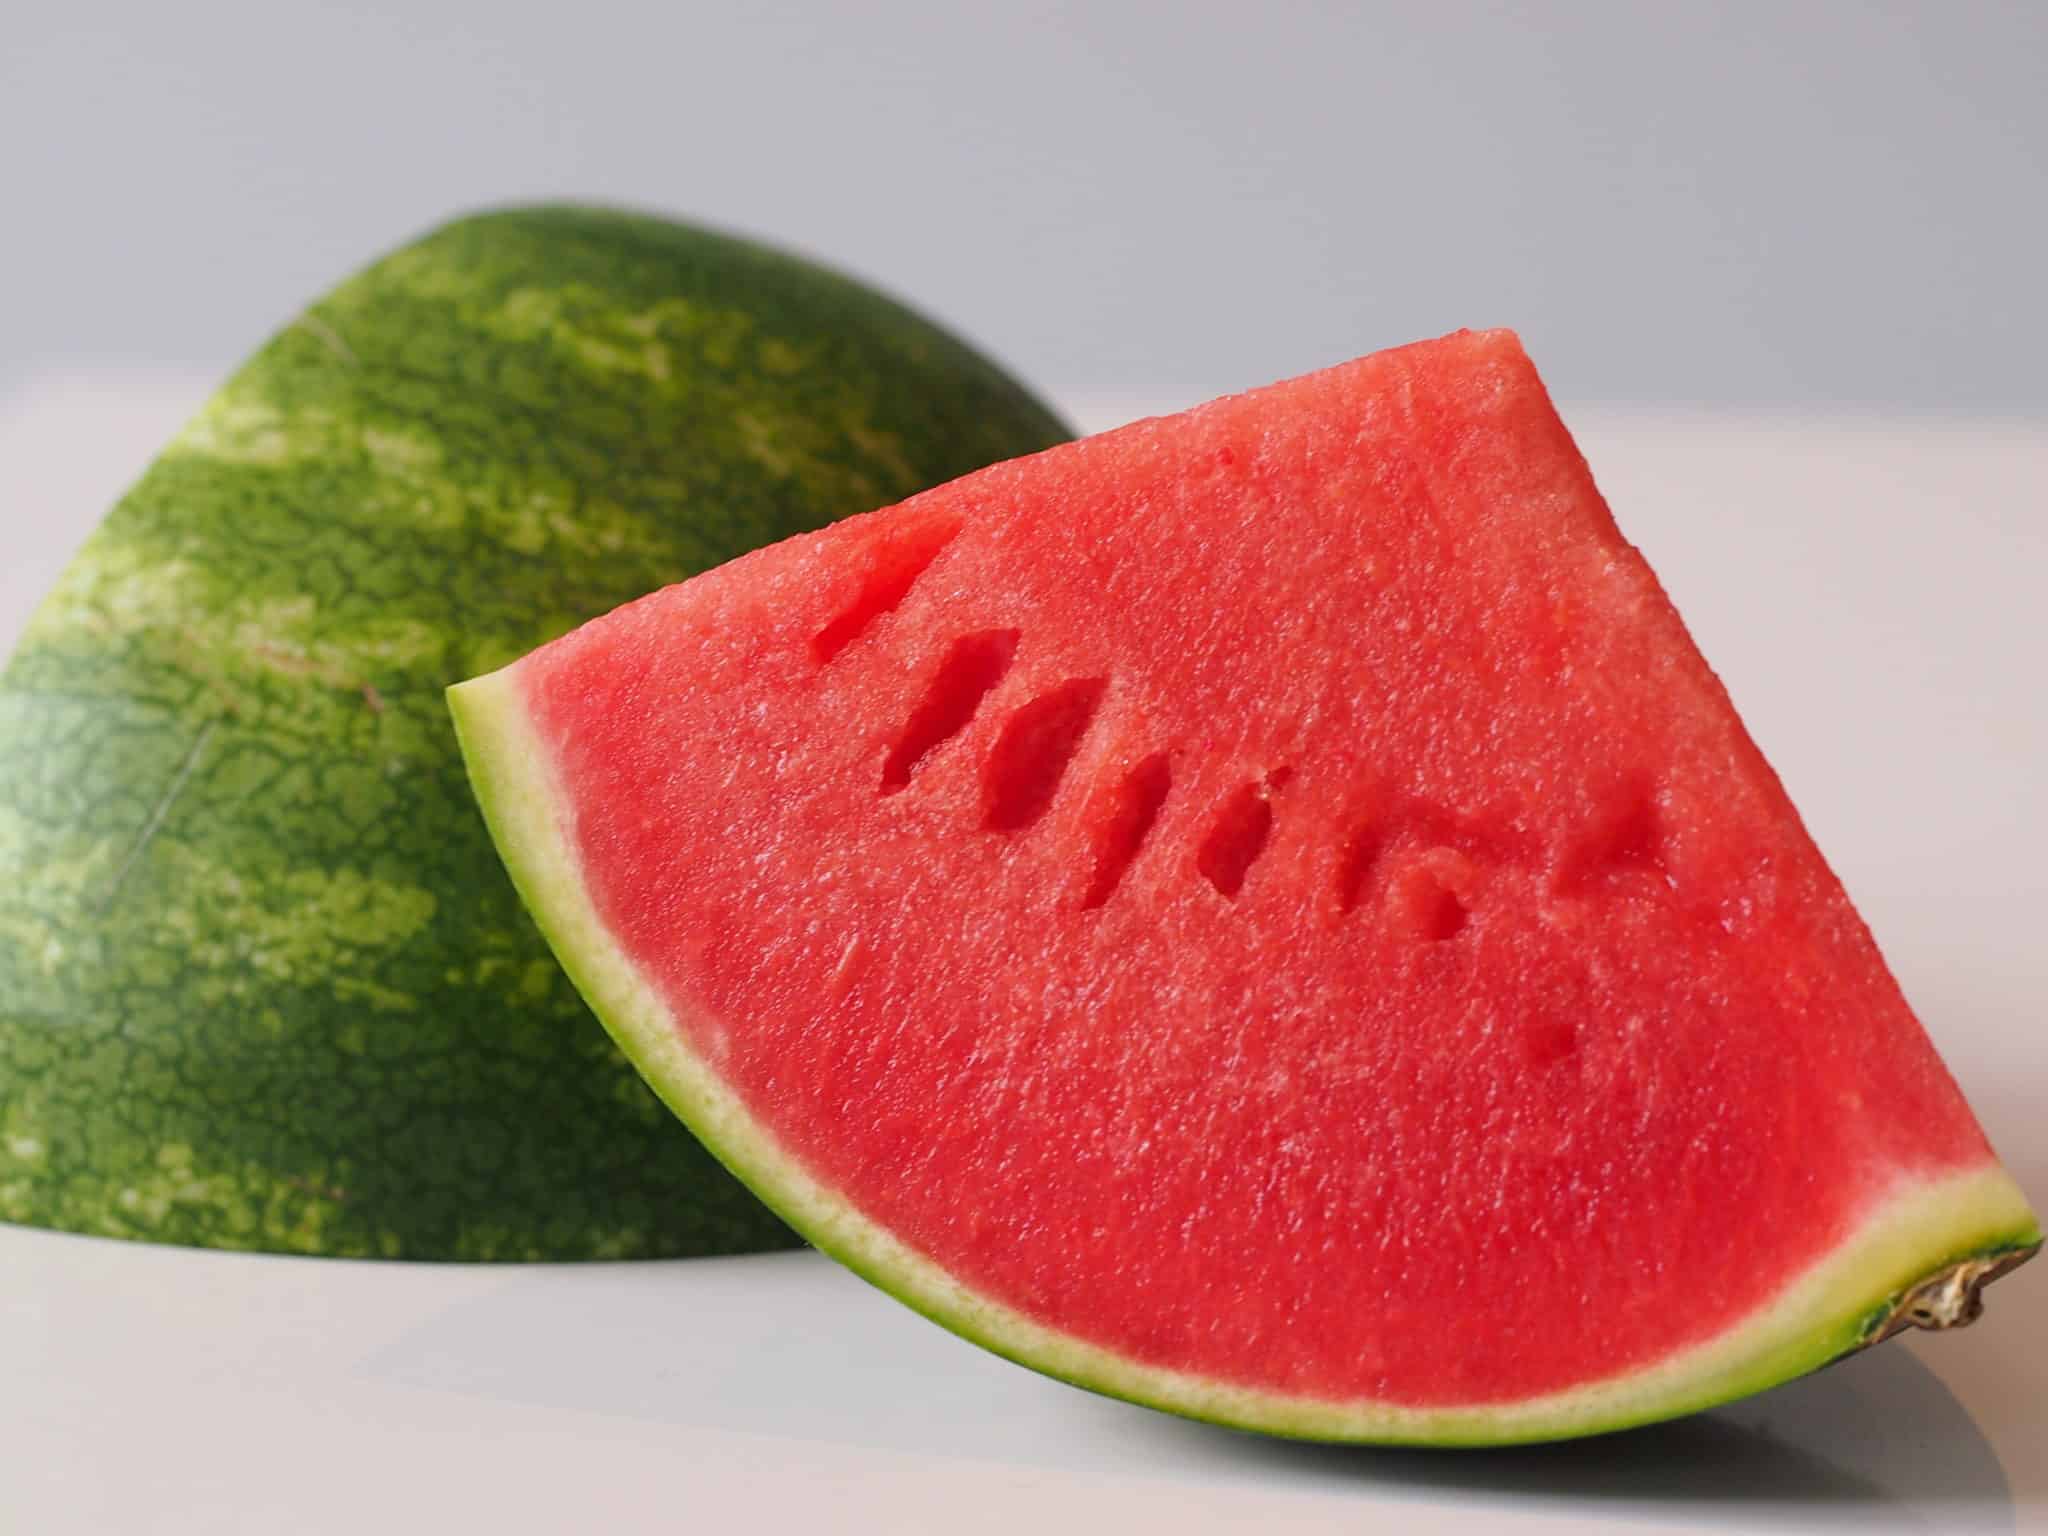 Watermelon: Here’s why every pregnant woman should make this fruit their favorite